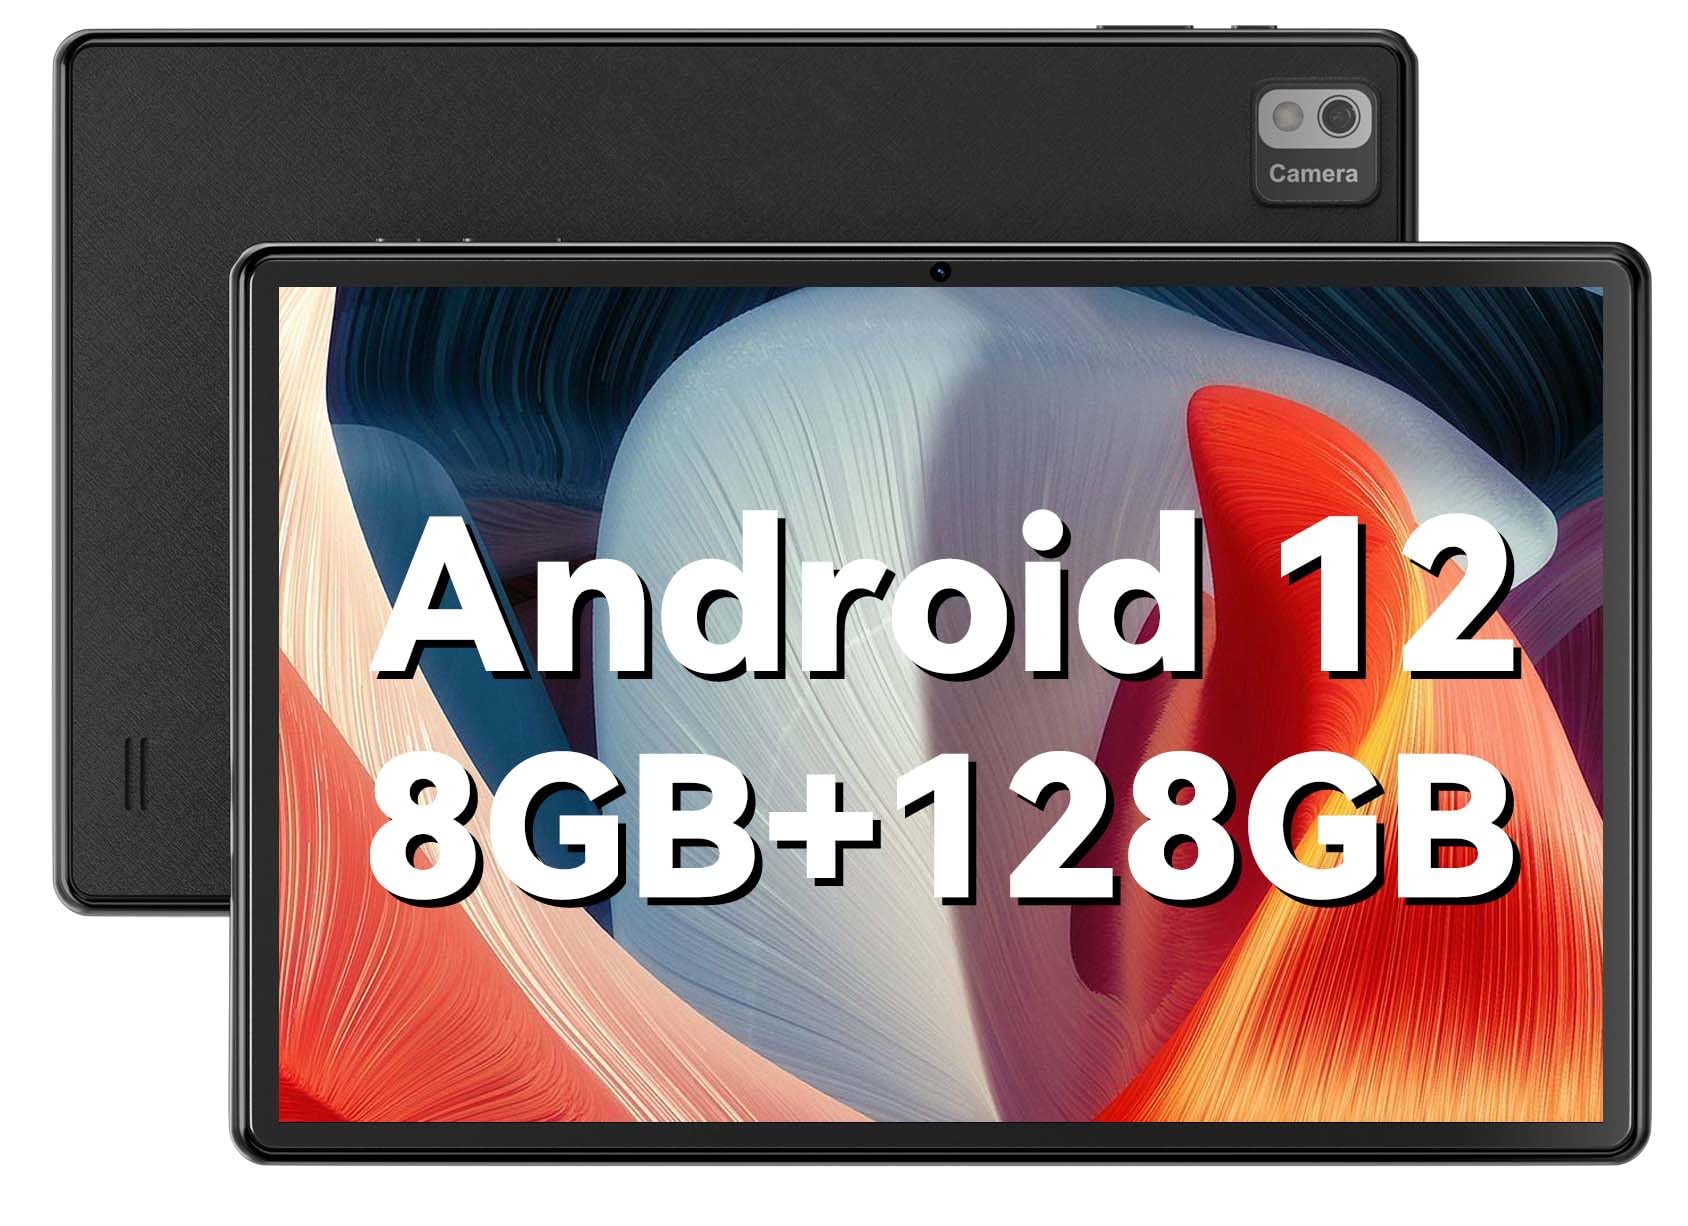 SGIN 10 Inch Android 12 Tablet, 8GB RAM 128GB ROM Tablets Computer with MTK Octa-Core 2.0Ghz Processor, 1982 * 1200 HD IPS Display, 5MP+8MP Camera, GPS, WiFi, Bluetooth, 6000mAh